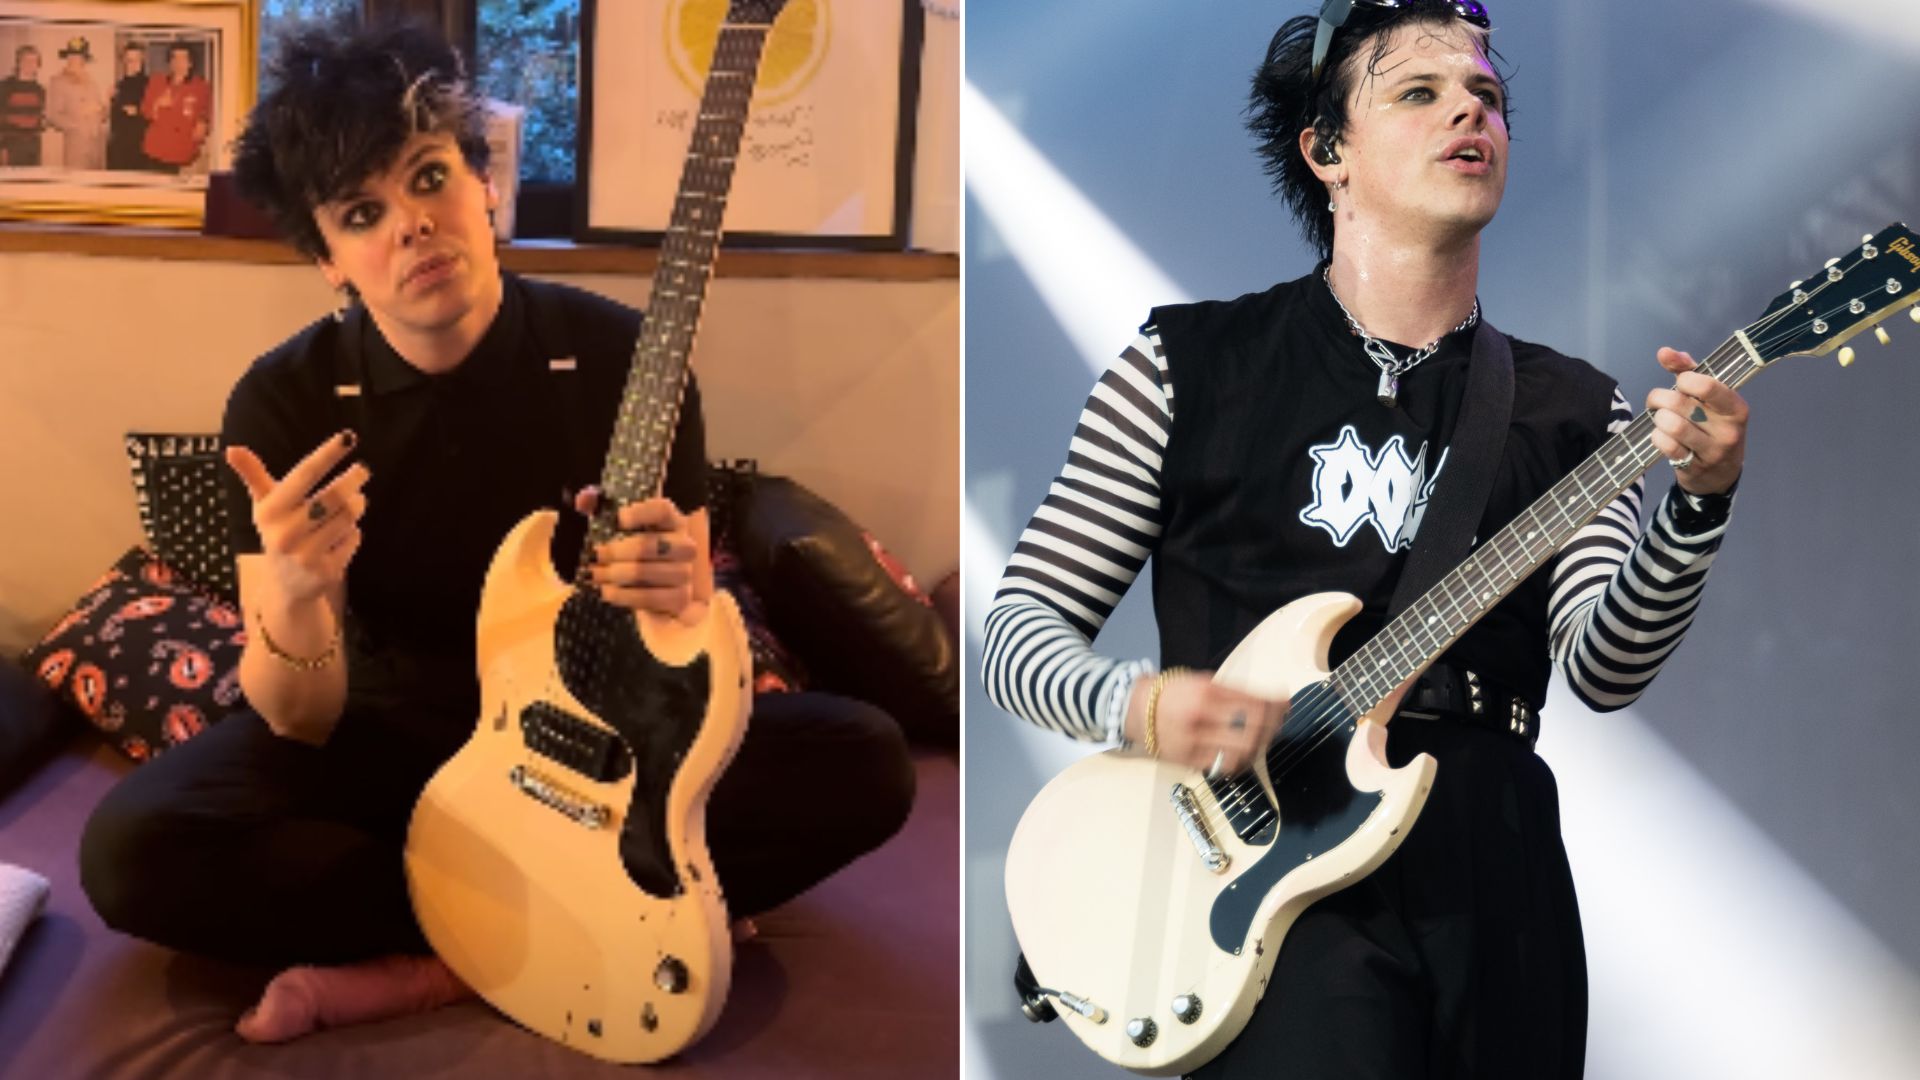 “This is my guitar. I’m absolutely buzzing”: Epiphone is set to release a Yungblud signature SG Junior – and one of its prototypes is already up for grabs